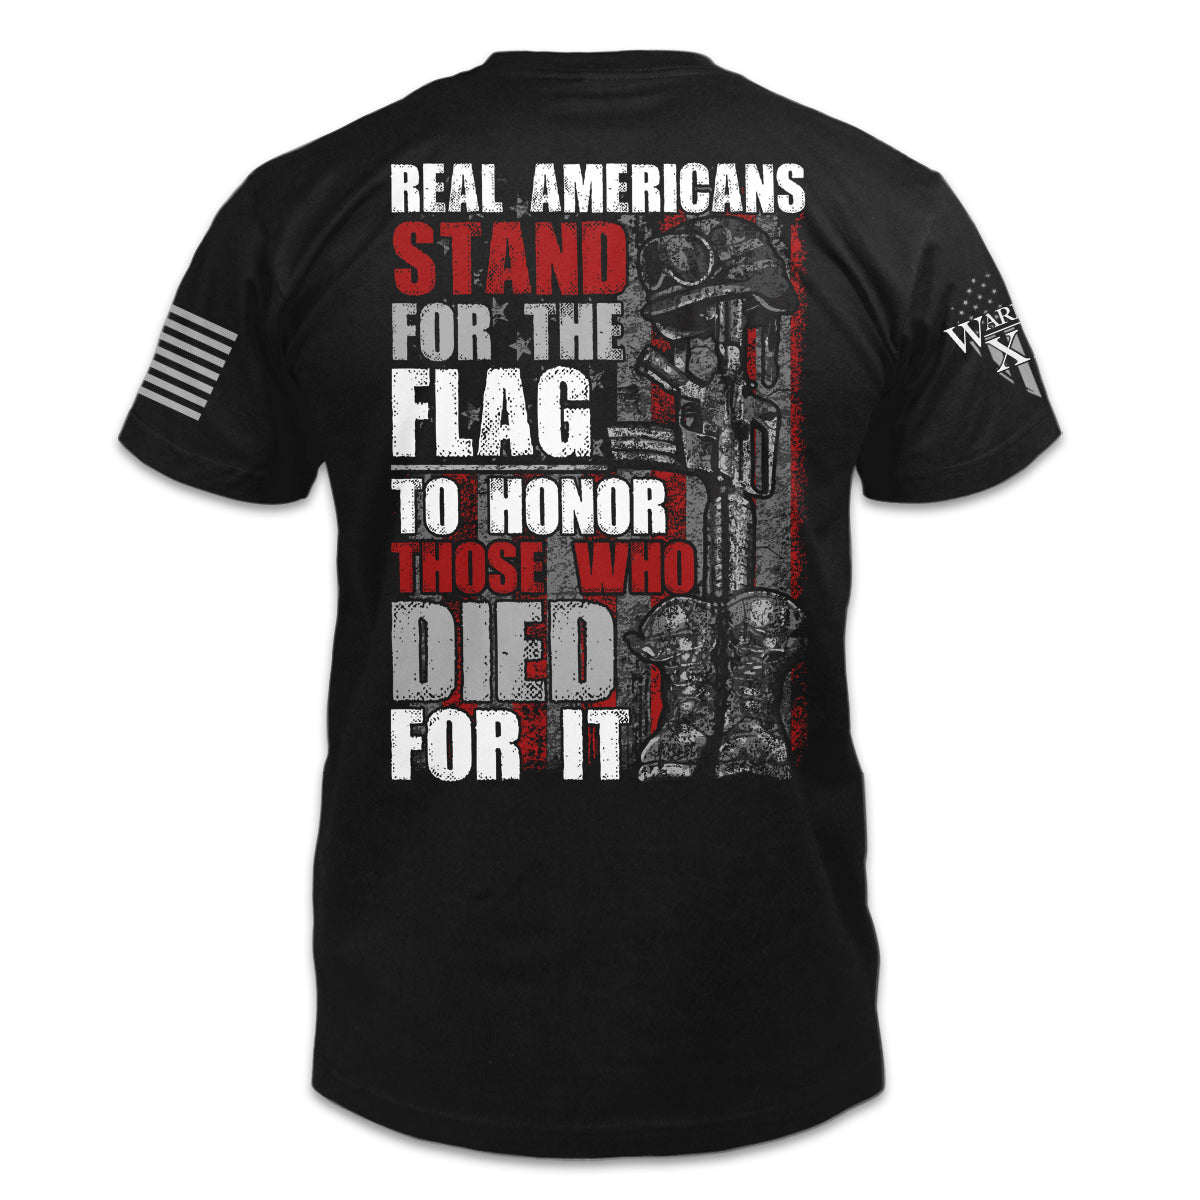 A black t-shirt with the words "Real Americans Stand For The Flag To Honor Those Who Died For It!" printed on the back of the shirt.